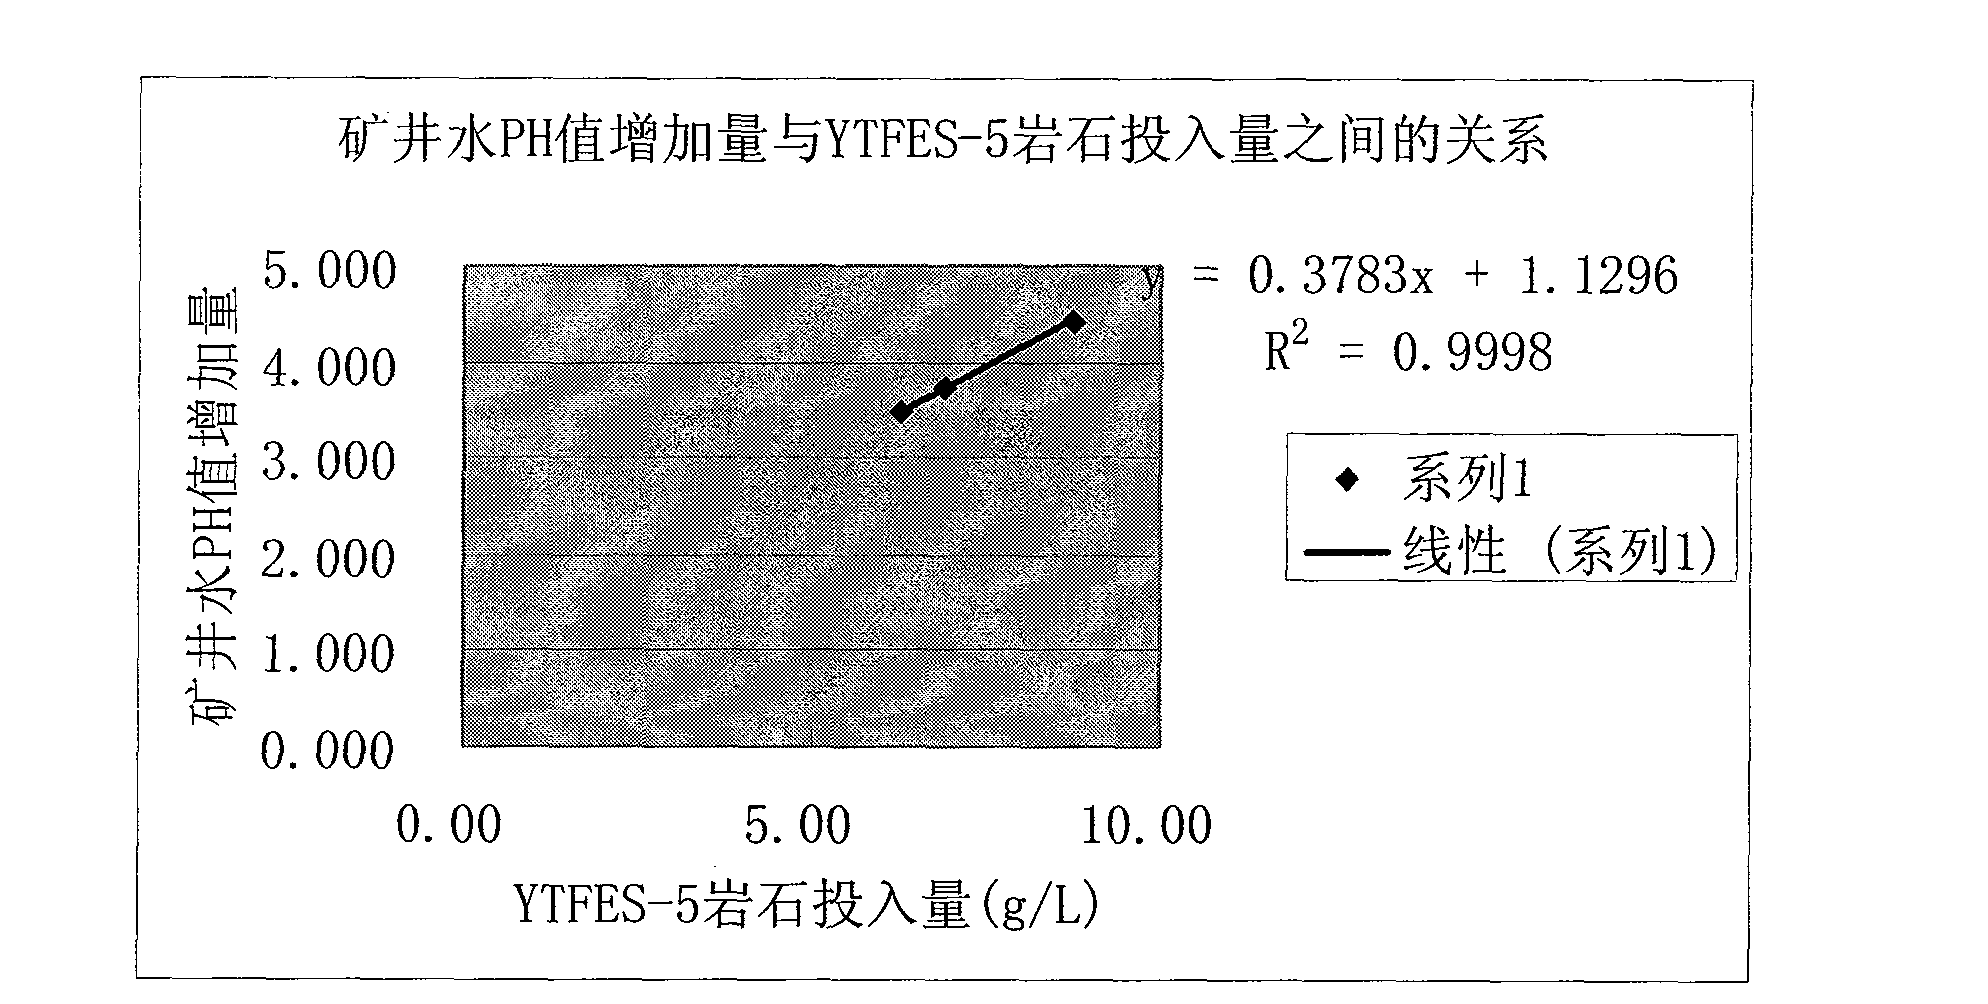 Neutralizing agent for acidic mine water treatment in Zhaotong region and preparation method thereof